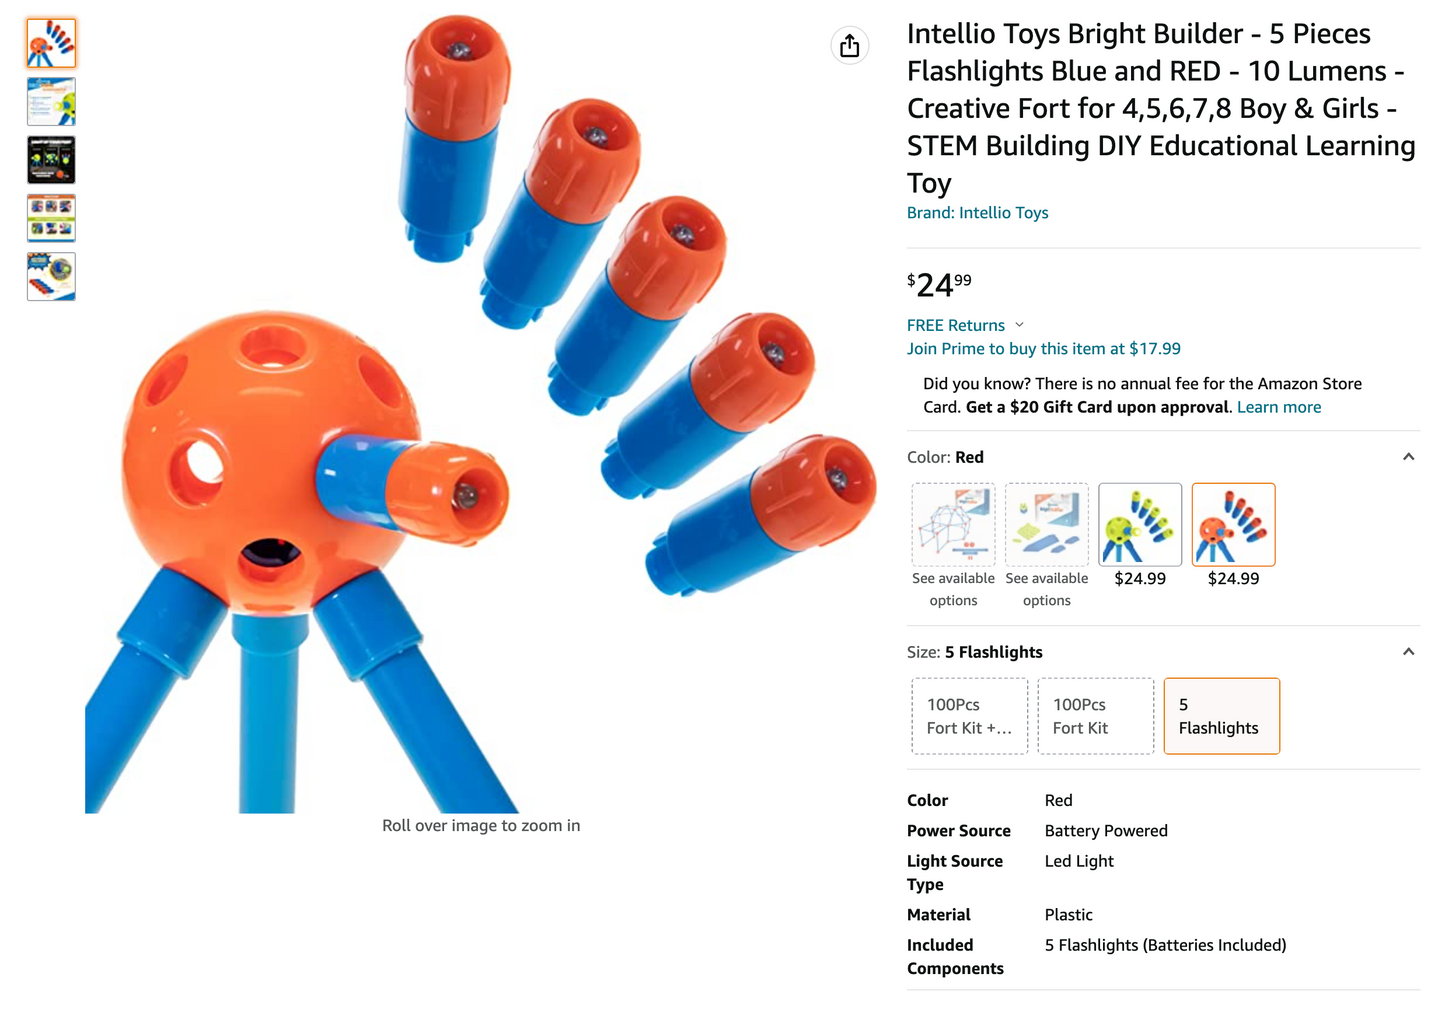 Intellio Toys Bright Builder - 5 Pieces Flashlights Blue and RED - [SKU: L-5BR]